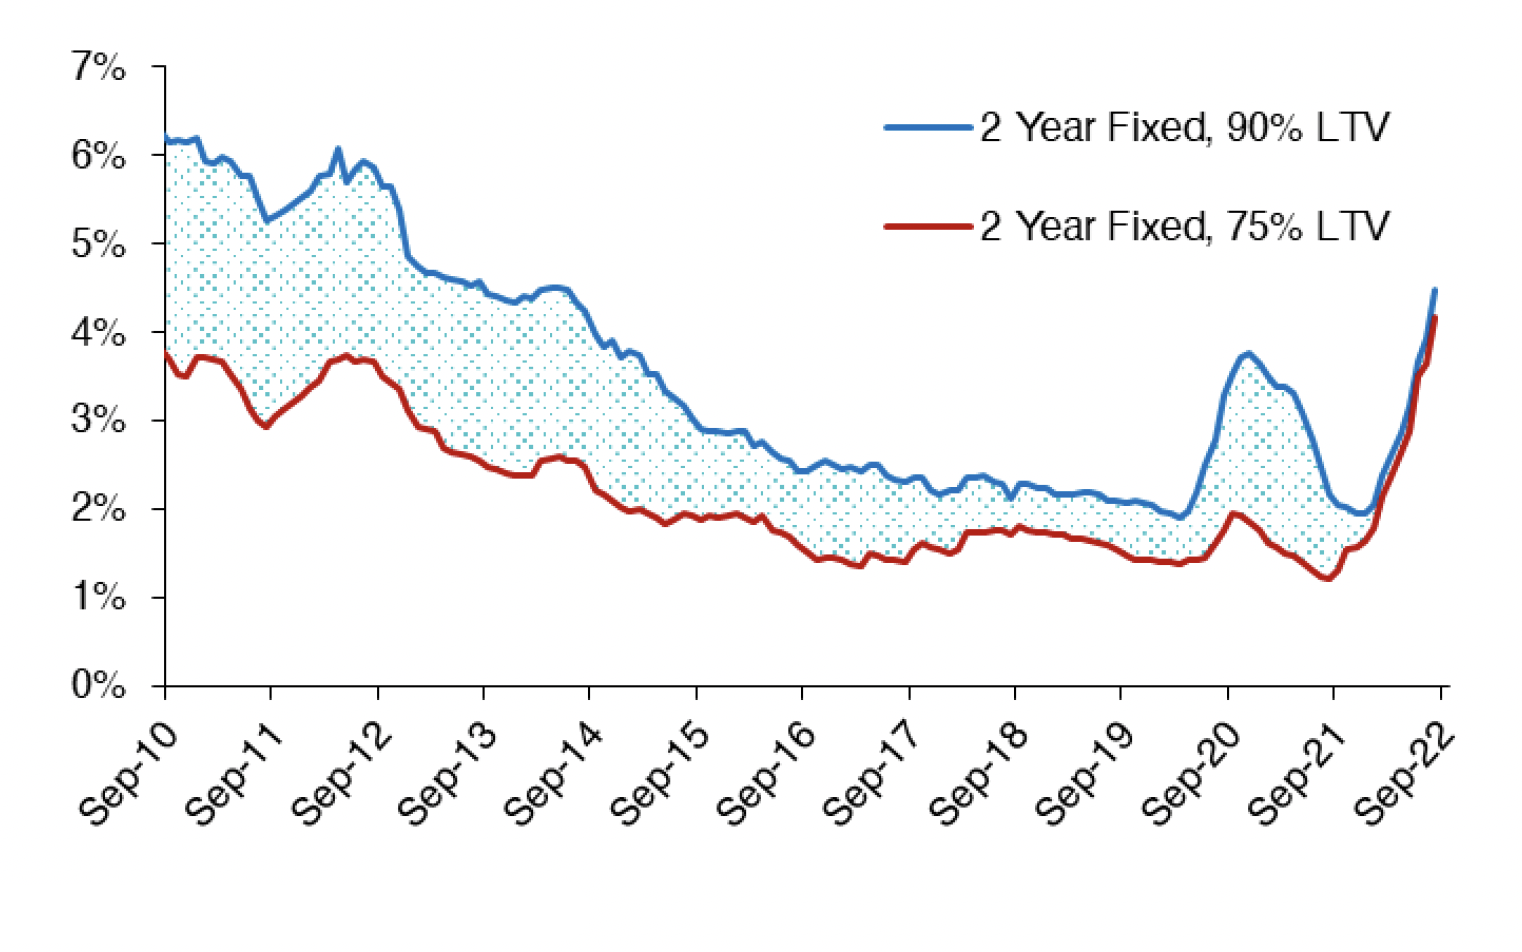 Chart 6.3 highlights how the average advertised 2 year fixed rate mortgage with a 75% LTV and a 90% LTV have changed over time from September 2010 to September 2022. 